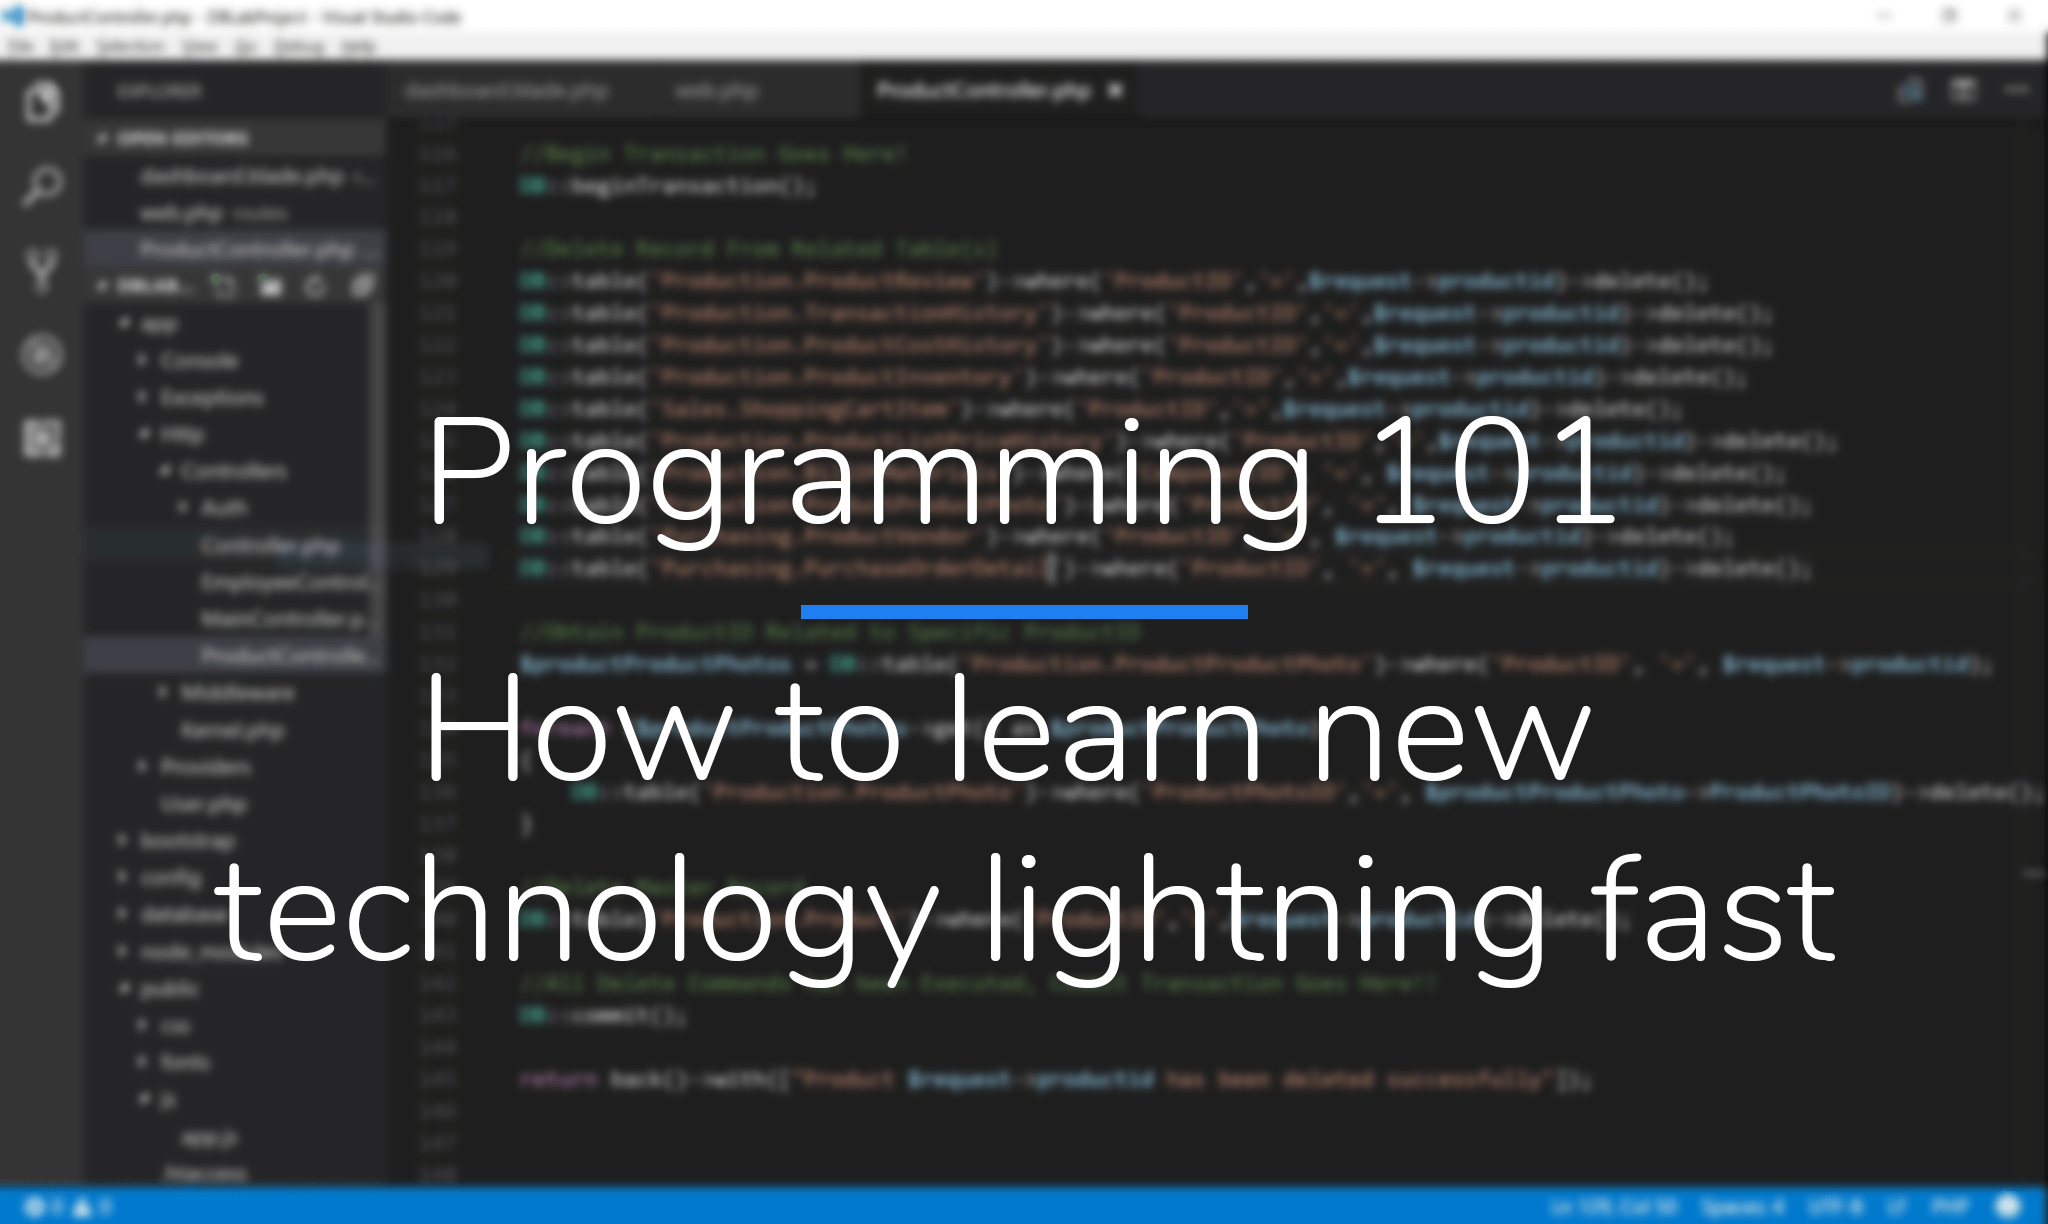 Programming 101 - How to learn new technology lightning fast